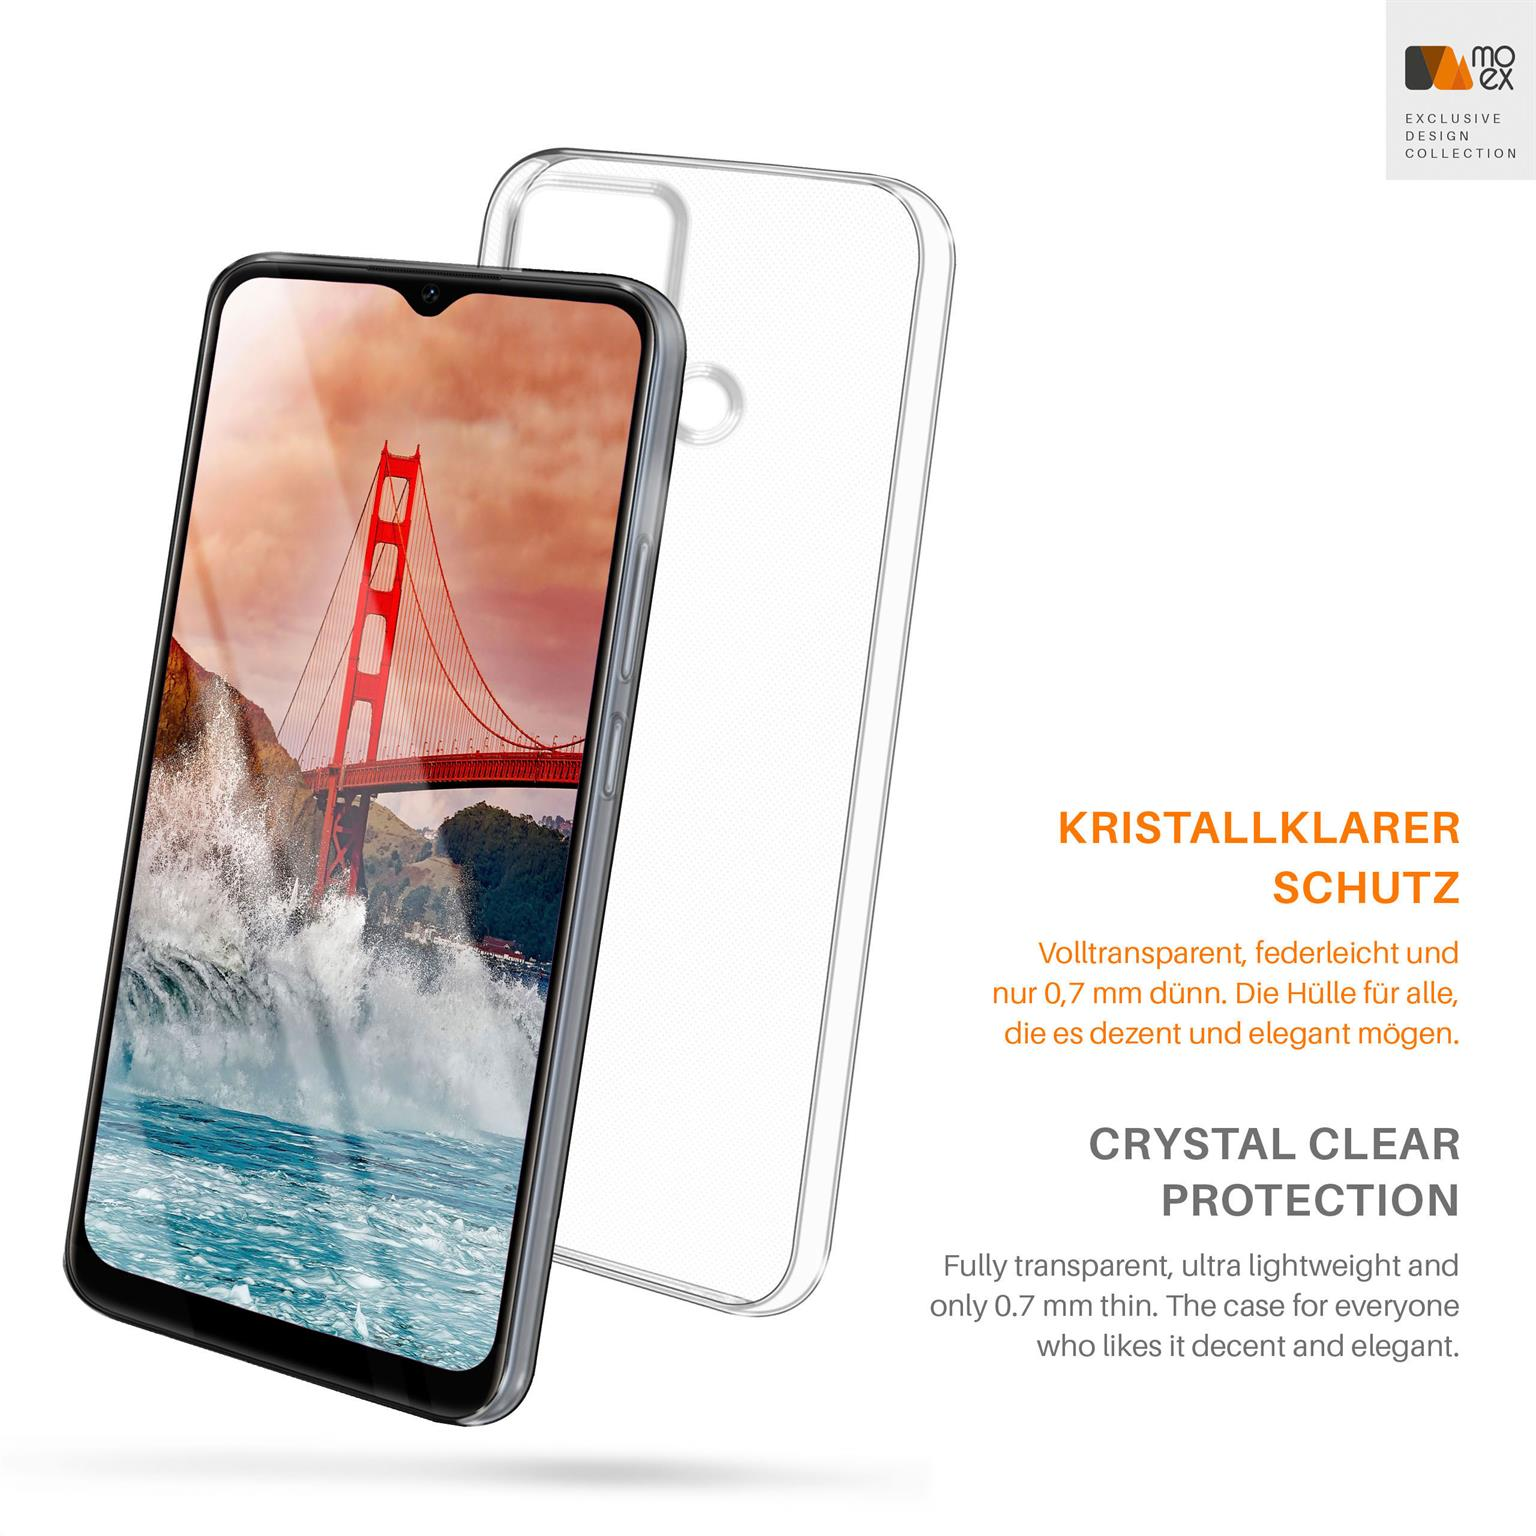 A15, Backcover, Aero Oppo, Case, MOEX Crystal-Clear